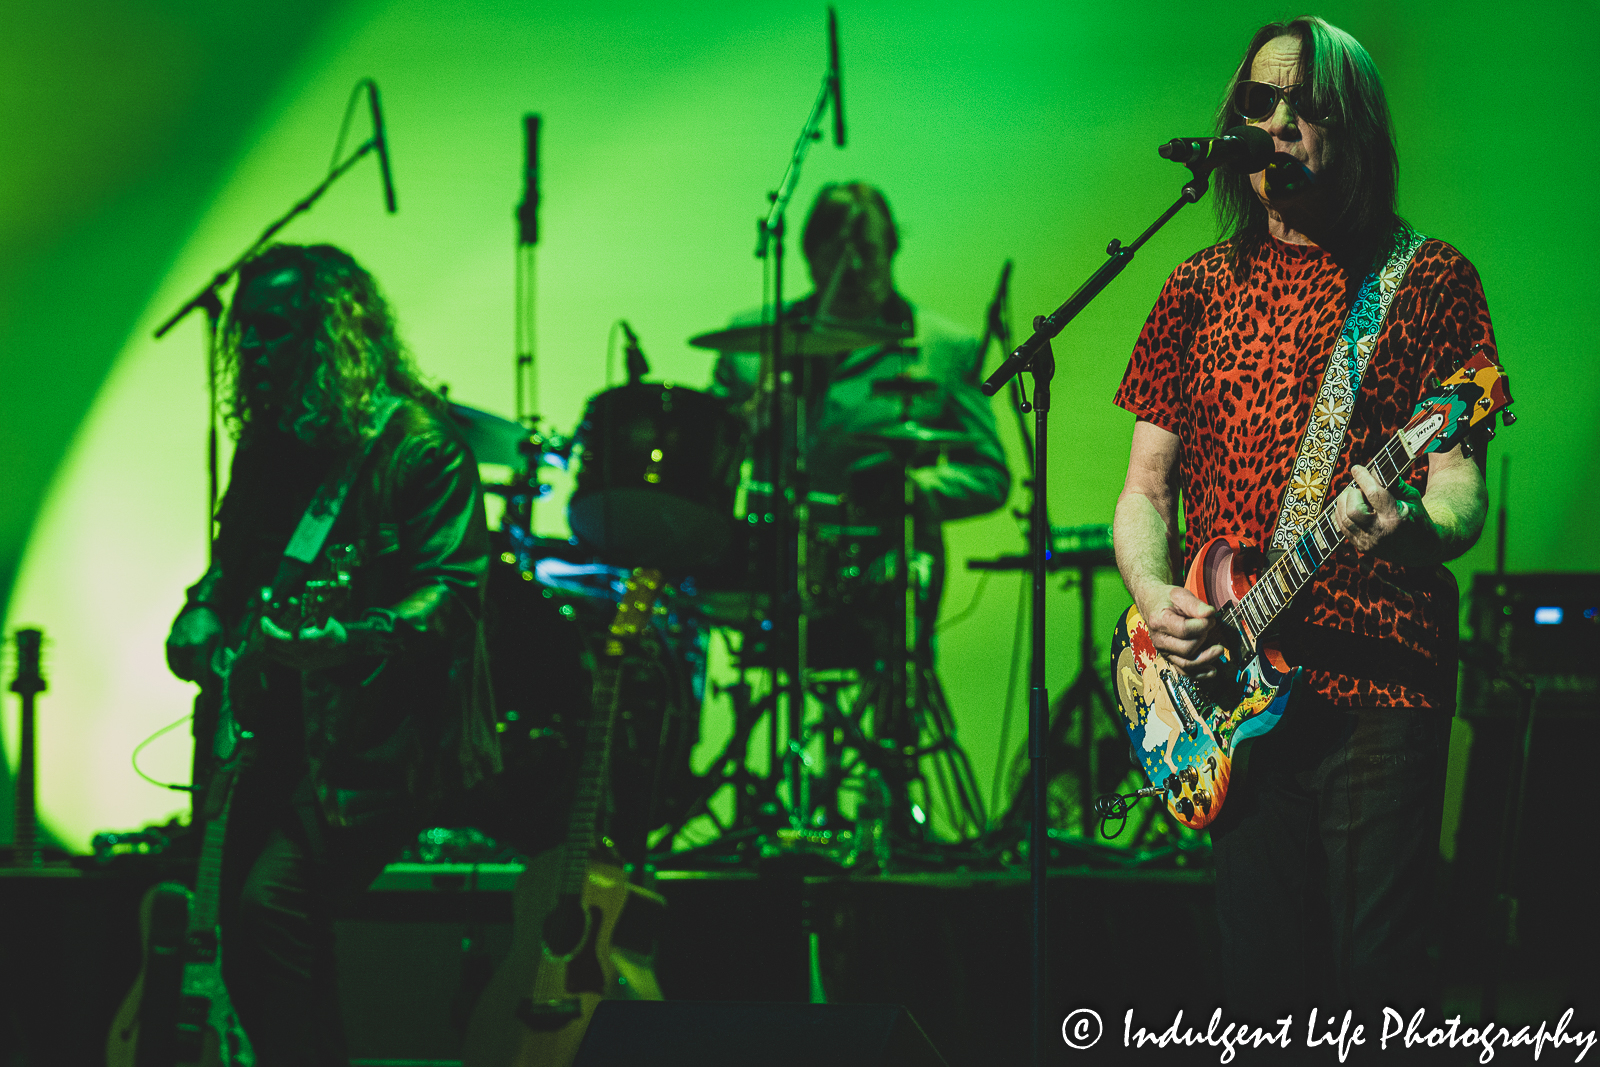 Singer-songwriter and multi-instrumentalist Todd Rundgren performing live in concert with former Chicago lead singer and bass player Jason Scheff and drummer Prairie Prince of The Tubes at Muriel Kauffman Theatre in downtown Kansas City, MO on March 27, 2022.